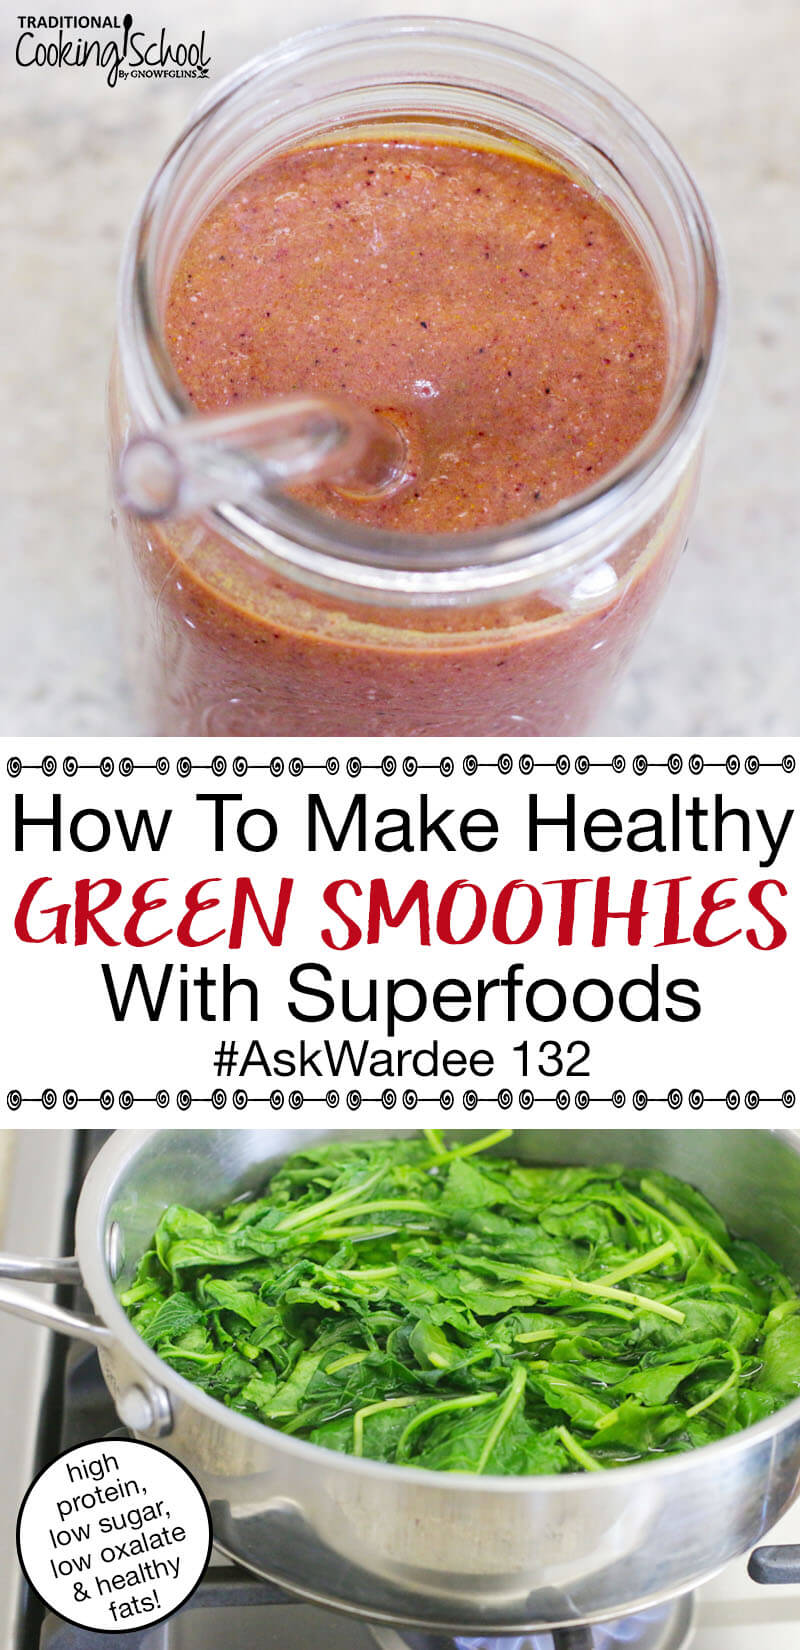 photo collage of steamed greens and a beautiful pink-colored smoothie in a Mason jar with a glass straw, with text overlay: "How To Make Healthy Green Smoothies With Superfoods #AskWardee 132 (high protein, low sugar, low oxalate, & healthy fats!)"